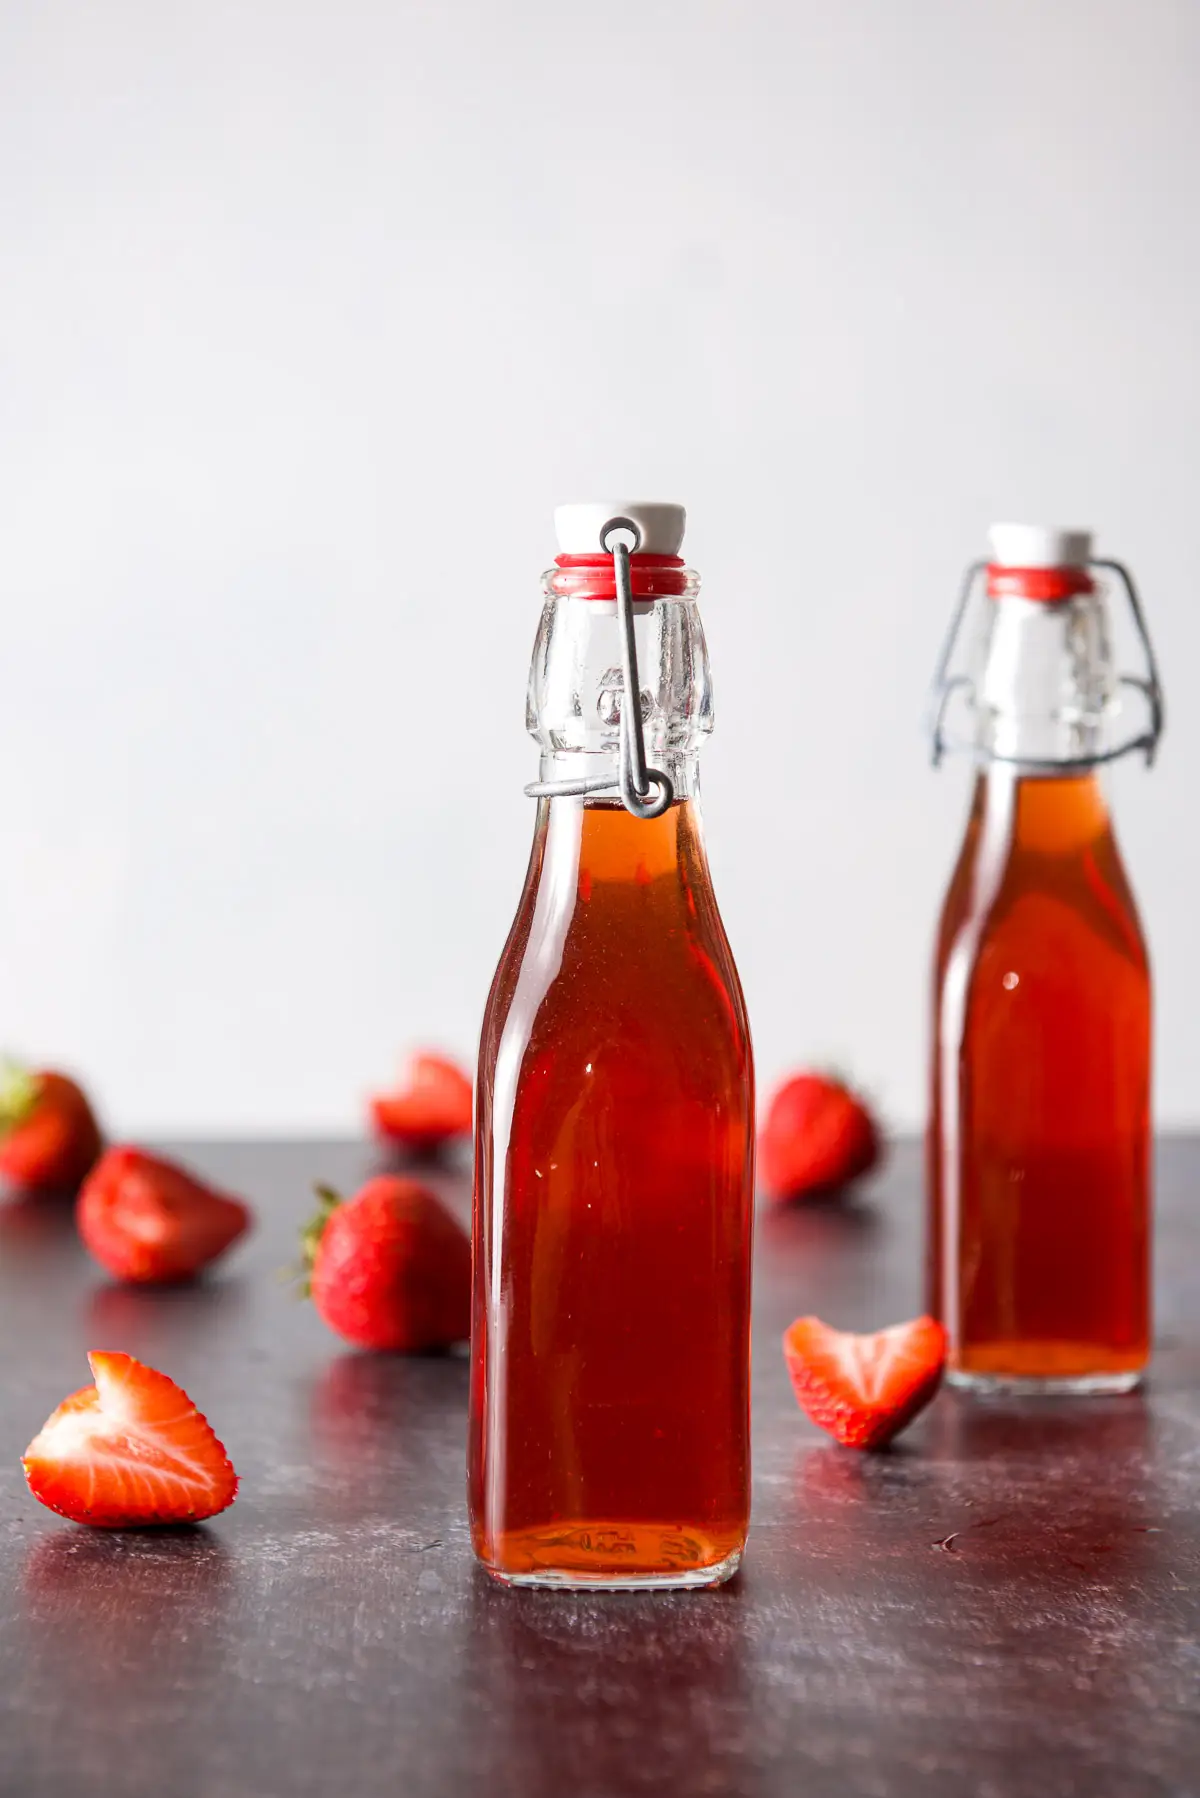 Vertical view of two small bottles of red vodka with strawberries on the table